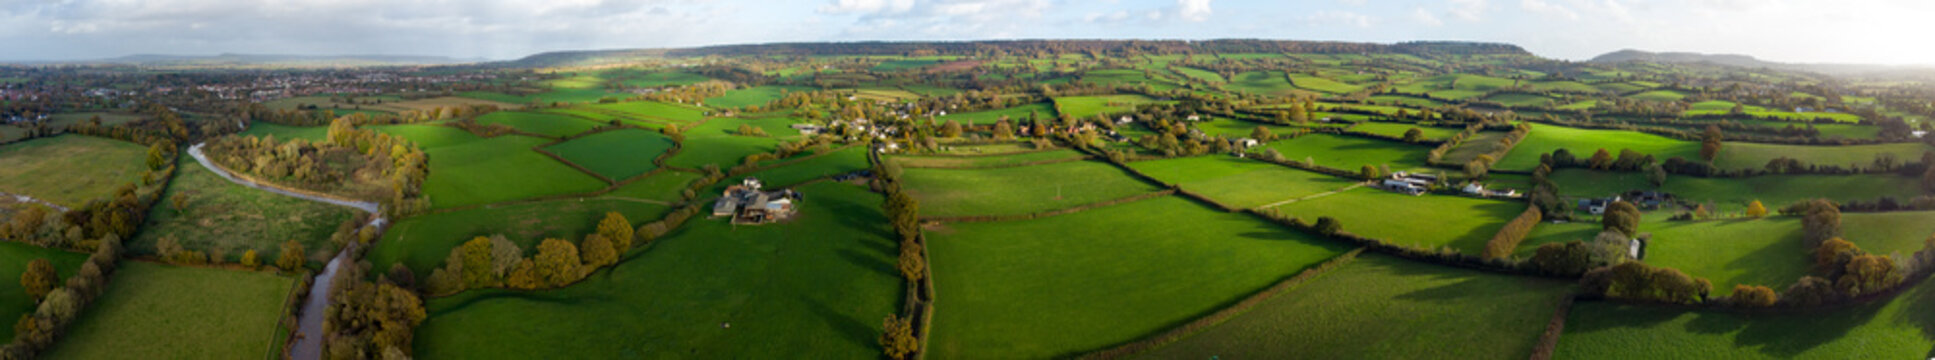 Aerial panoramic landscape of the English countryside. Green fields and rolling hills with farms and the river Otter in view. Devon landscape. Vibrant idyllic panoramic image of countryside life.